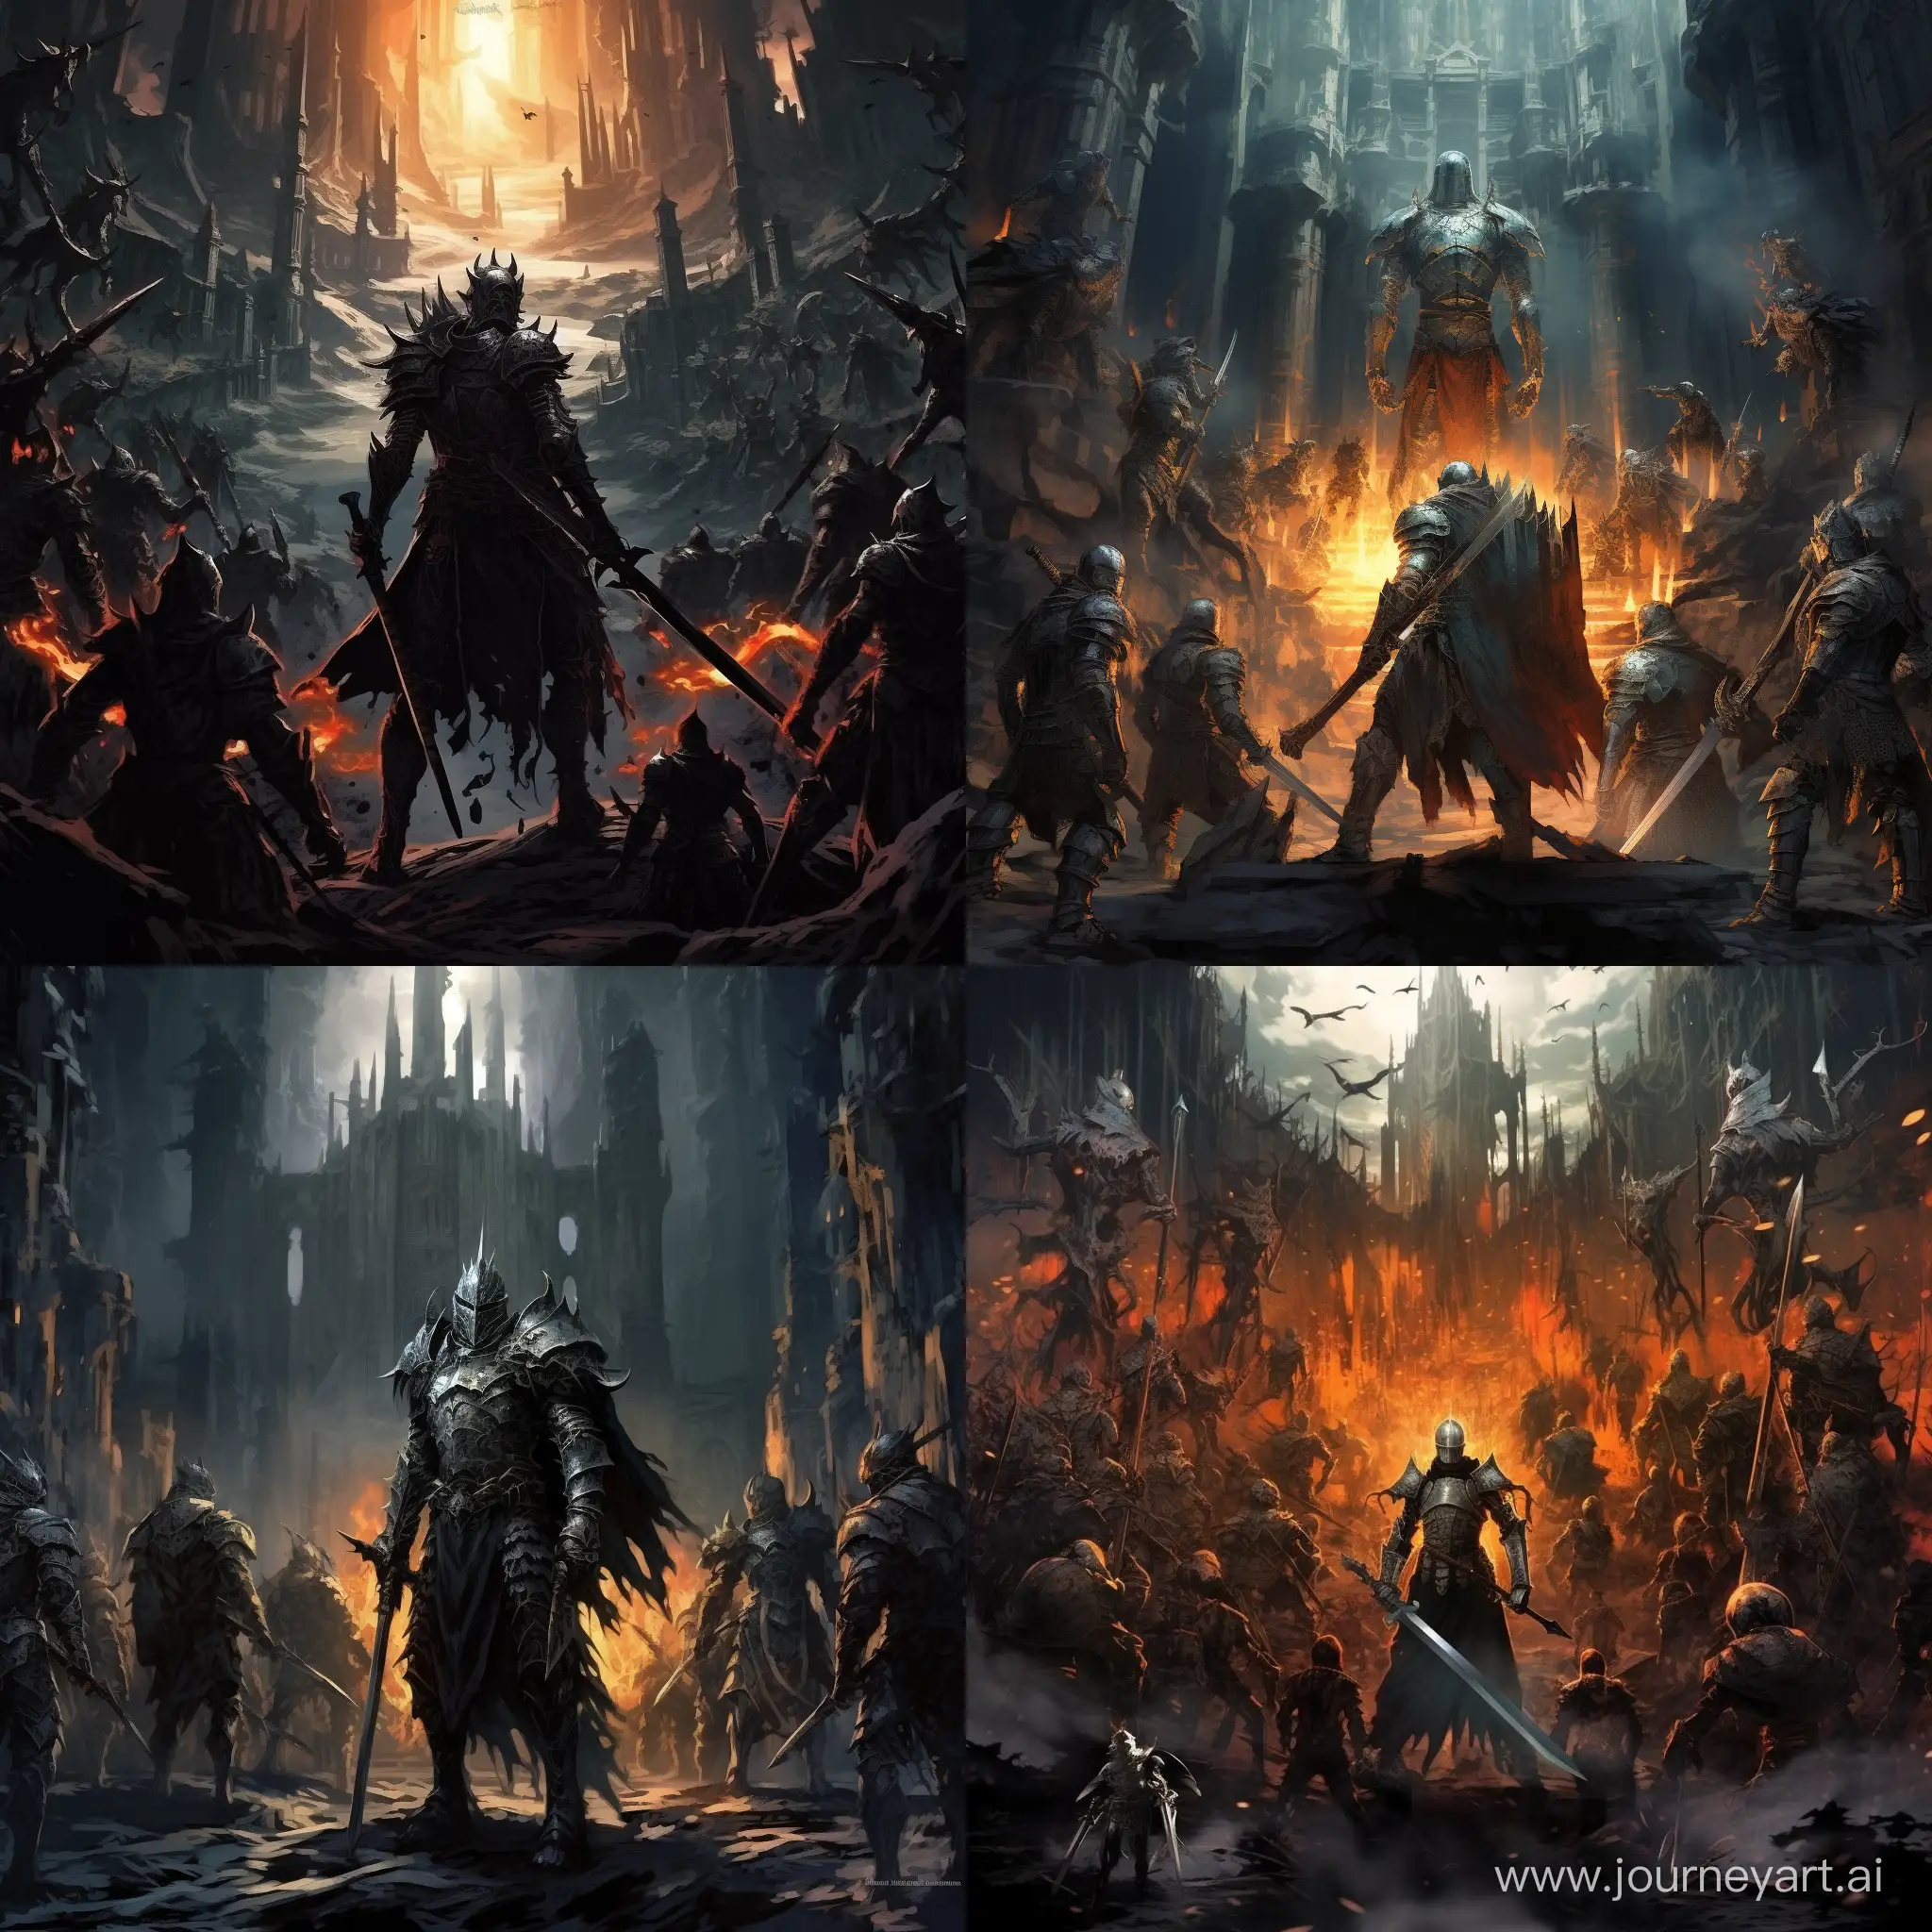 Epic-Battle-in-the-Dark-Souls-Castle-Miyazaki-and-Knights-Confronting-Mobs-and-Beasts